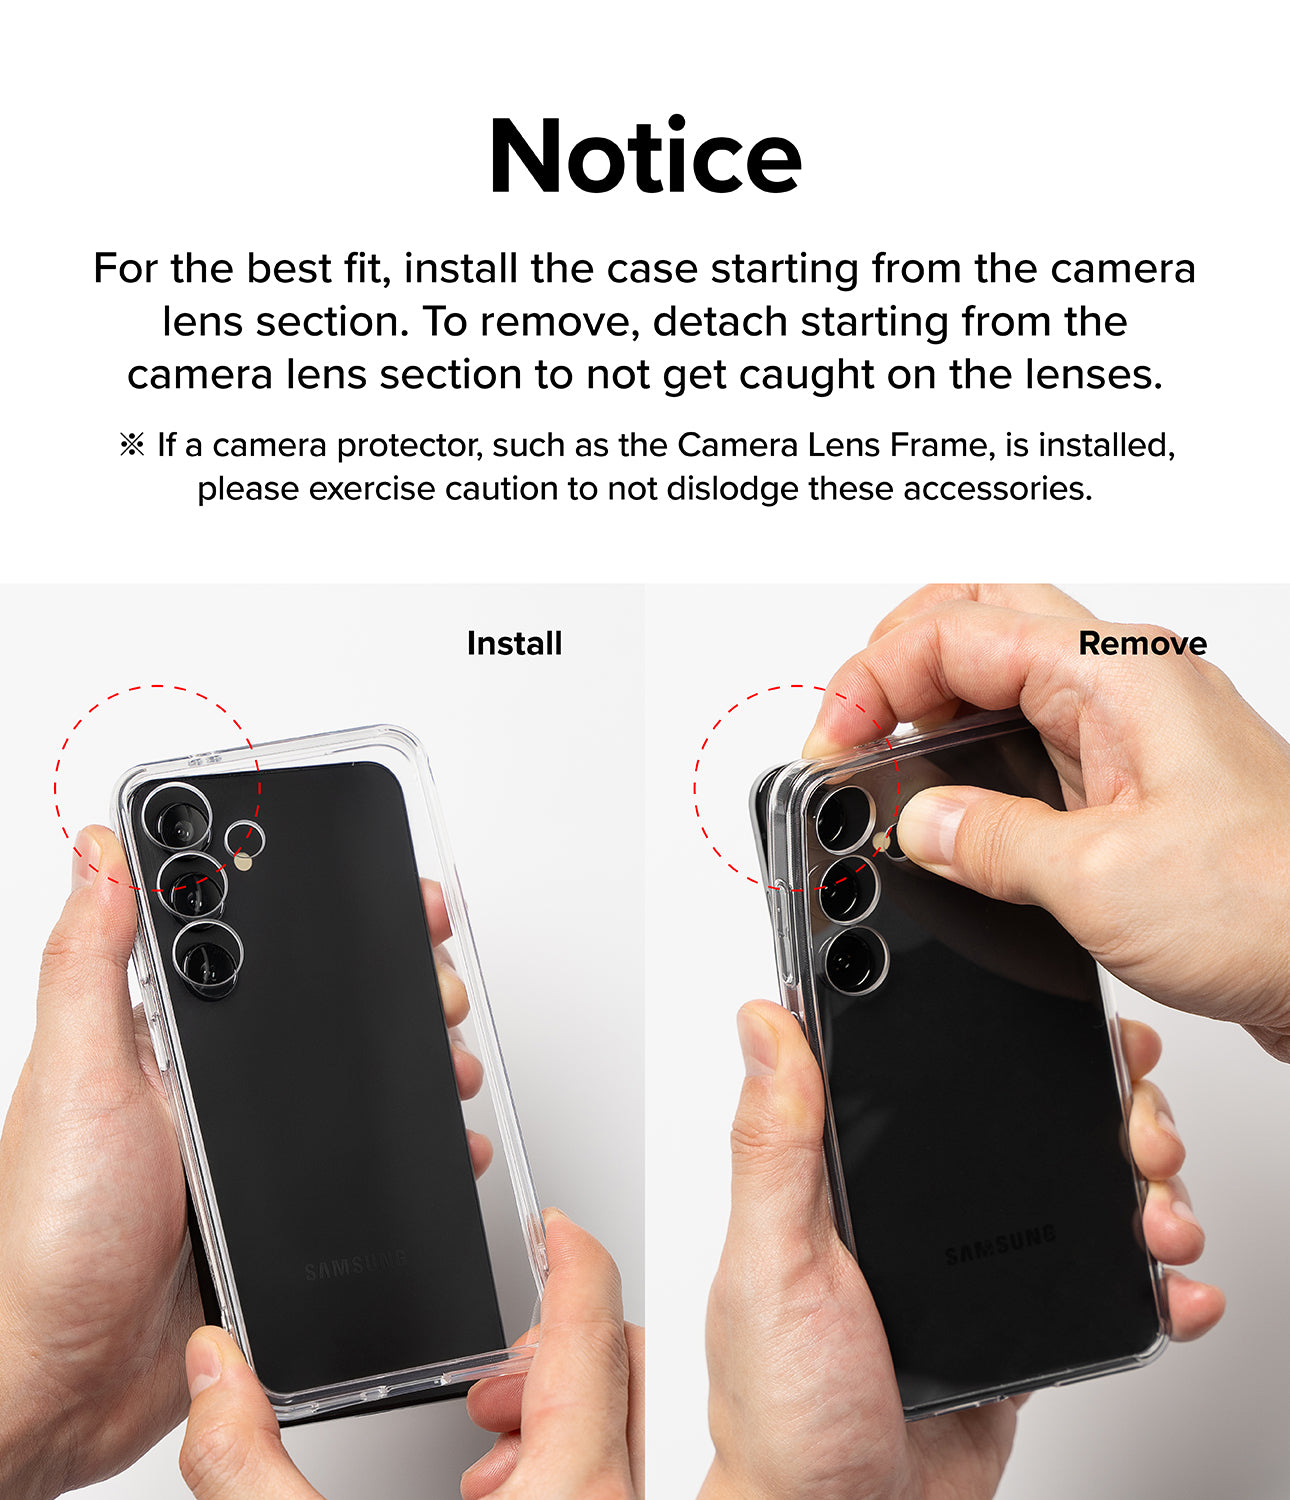 Galaxy S24 Ultra Case | Onyx - Notice. For the best fit, install the case starting form the camera lens section. To remove, detach starting from the camera lens section to not get caught on the lenses.